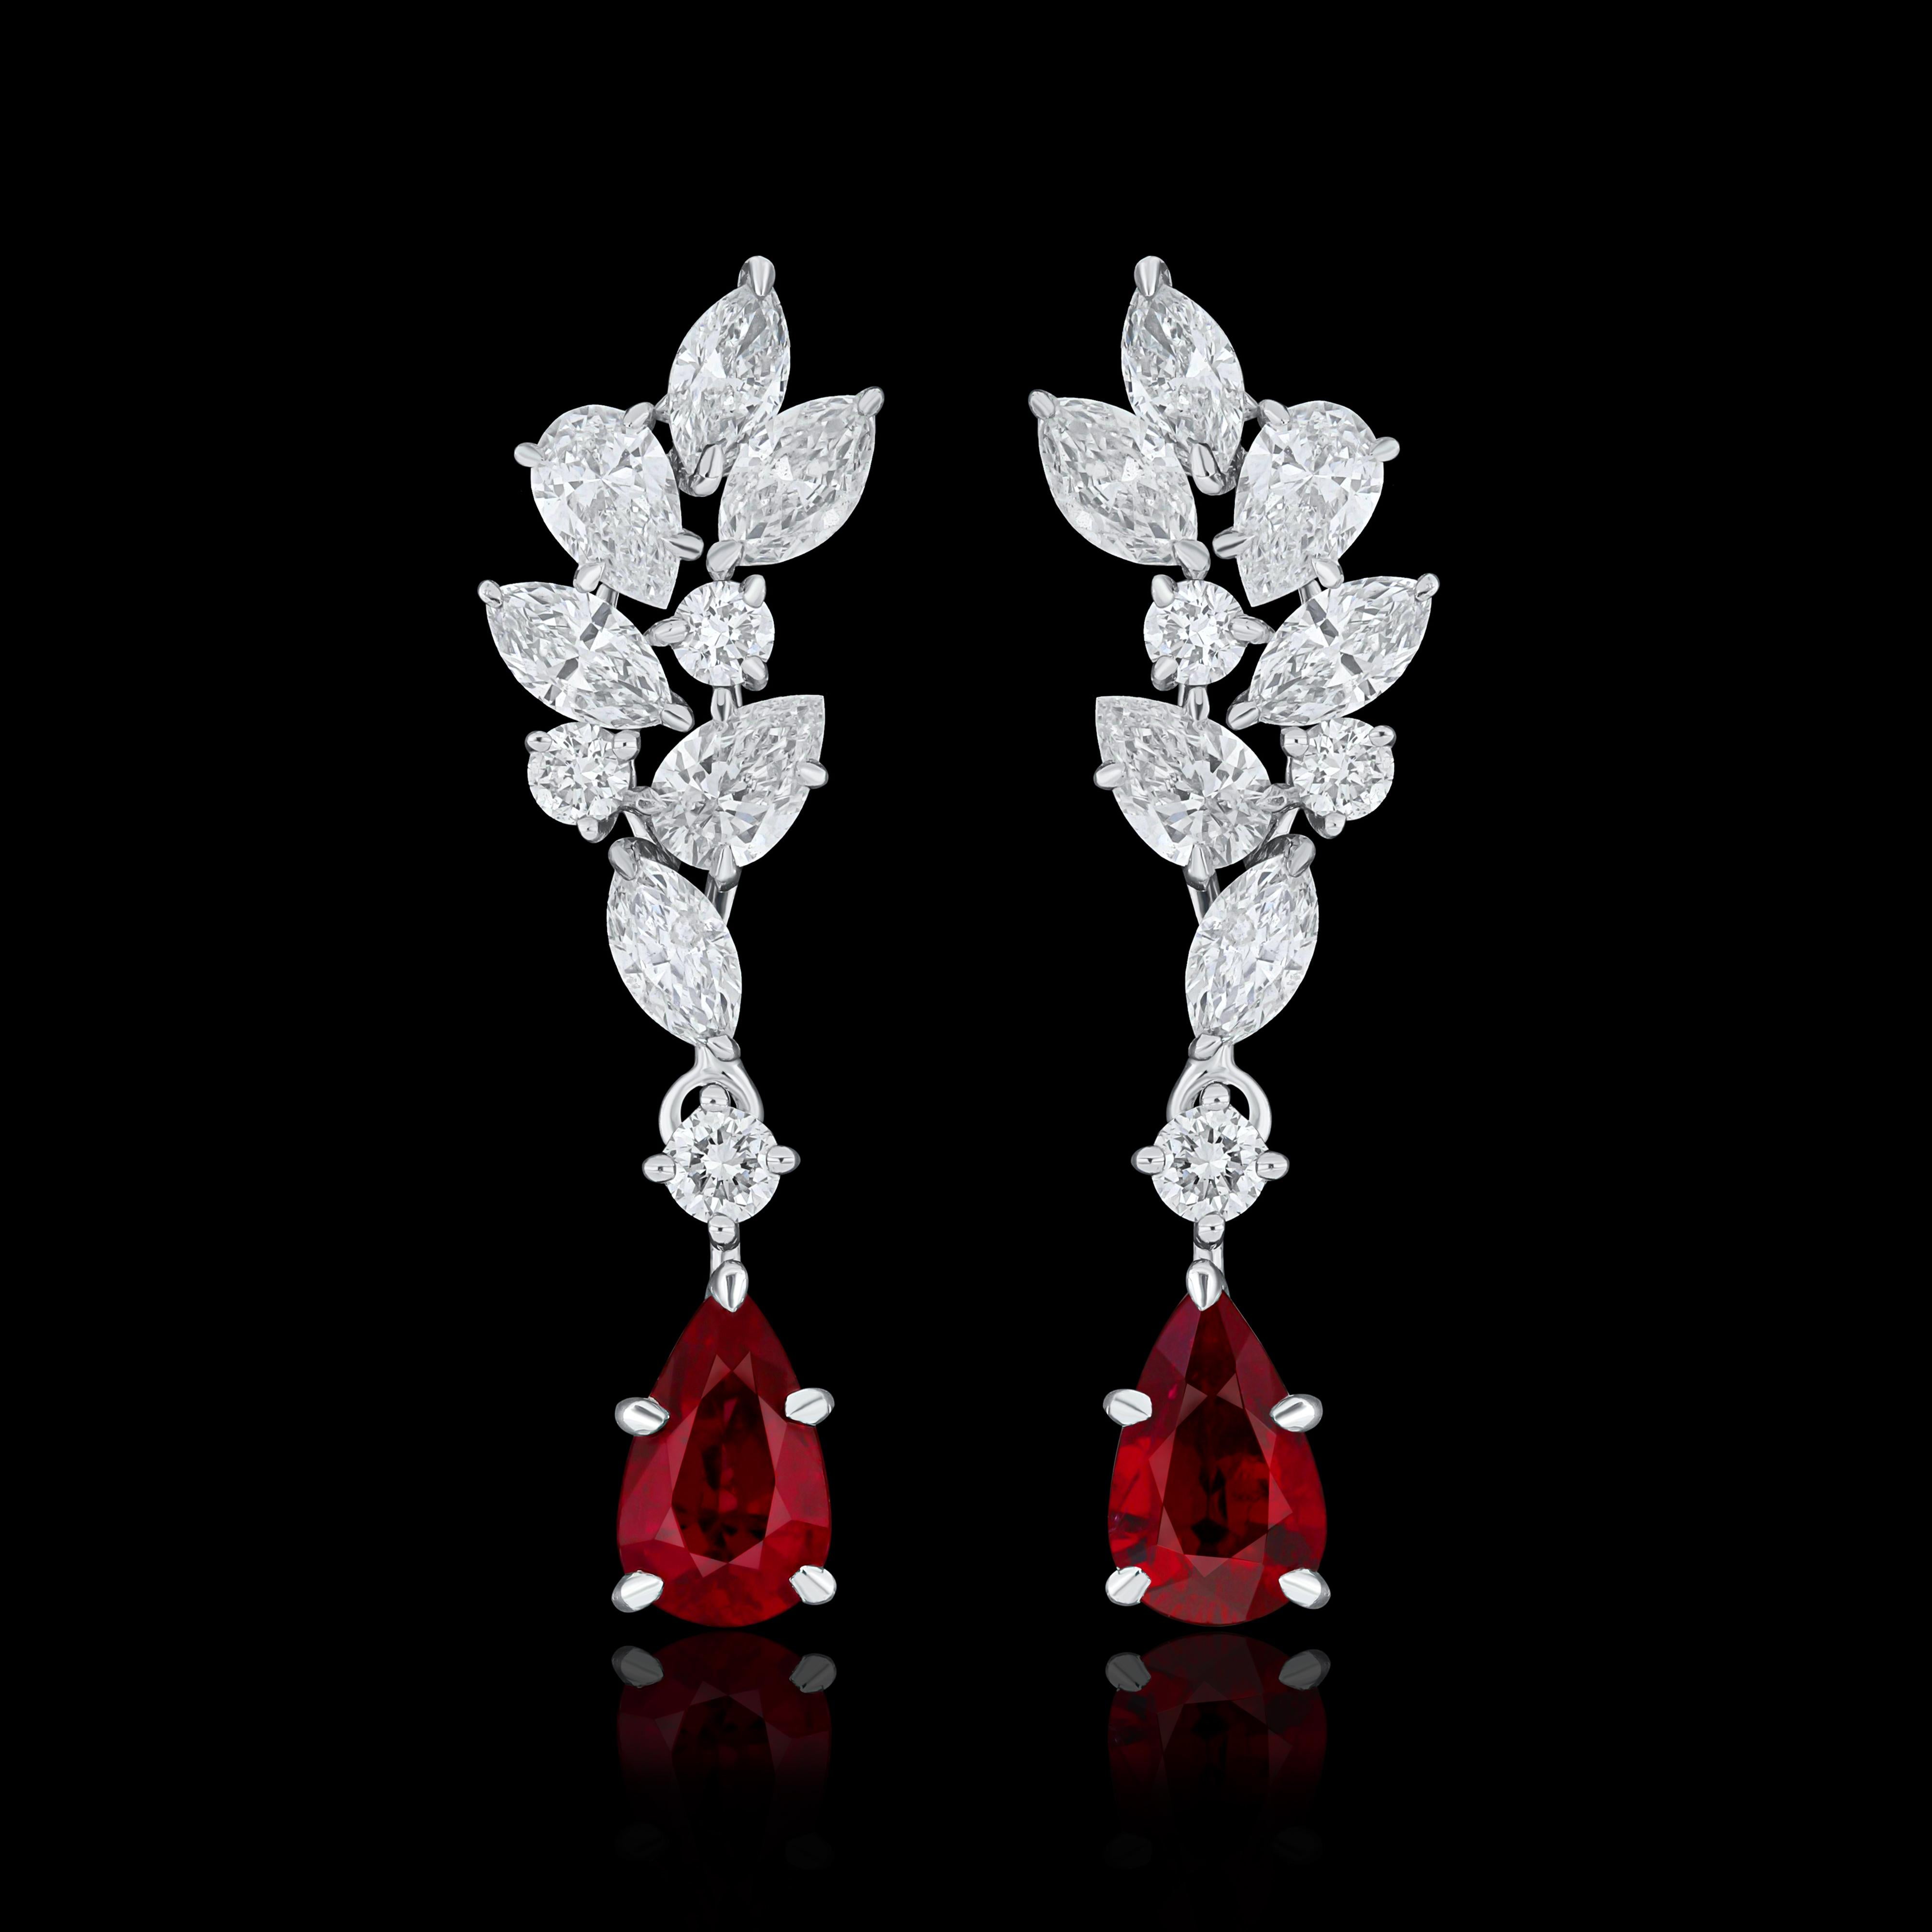 Elegant and exquisitely detailed 18 Karat White Gold Earring, center set with 0.71 Cts .Pear Shape Ruby Mozambique and micro pave set Diamonds, weighing approx. 0.98 Cts Beautifully Hand crafted in 18 Karat White Gold.

Stone Detail:
Ruby